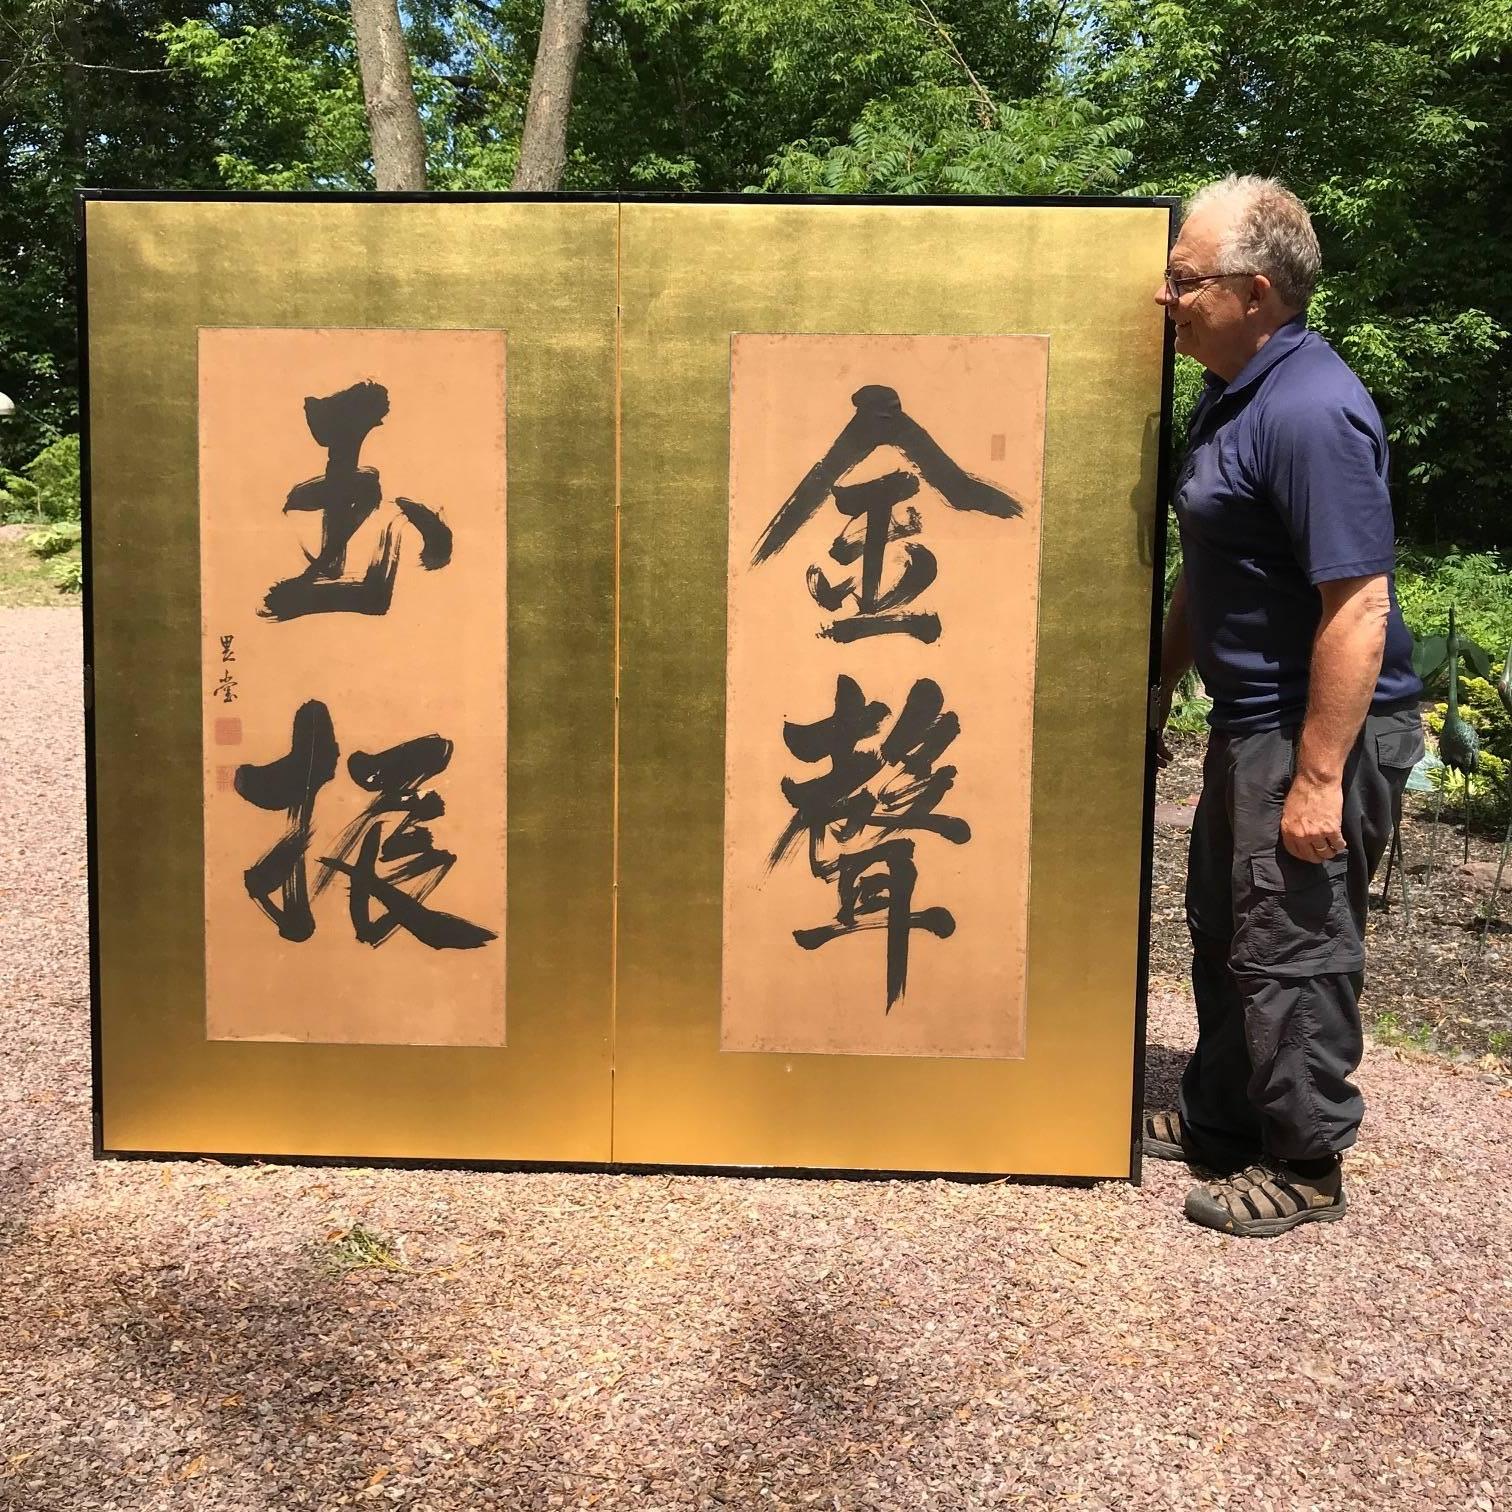 Japan, a fine two-panel screen Byobu of broad black brush strokes on gold ground, in big bold calligraphy roughly translating as 